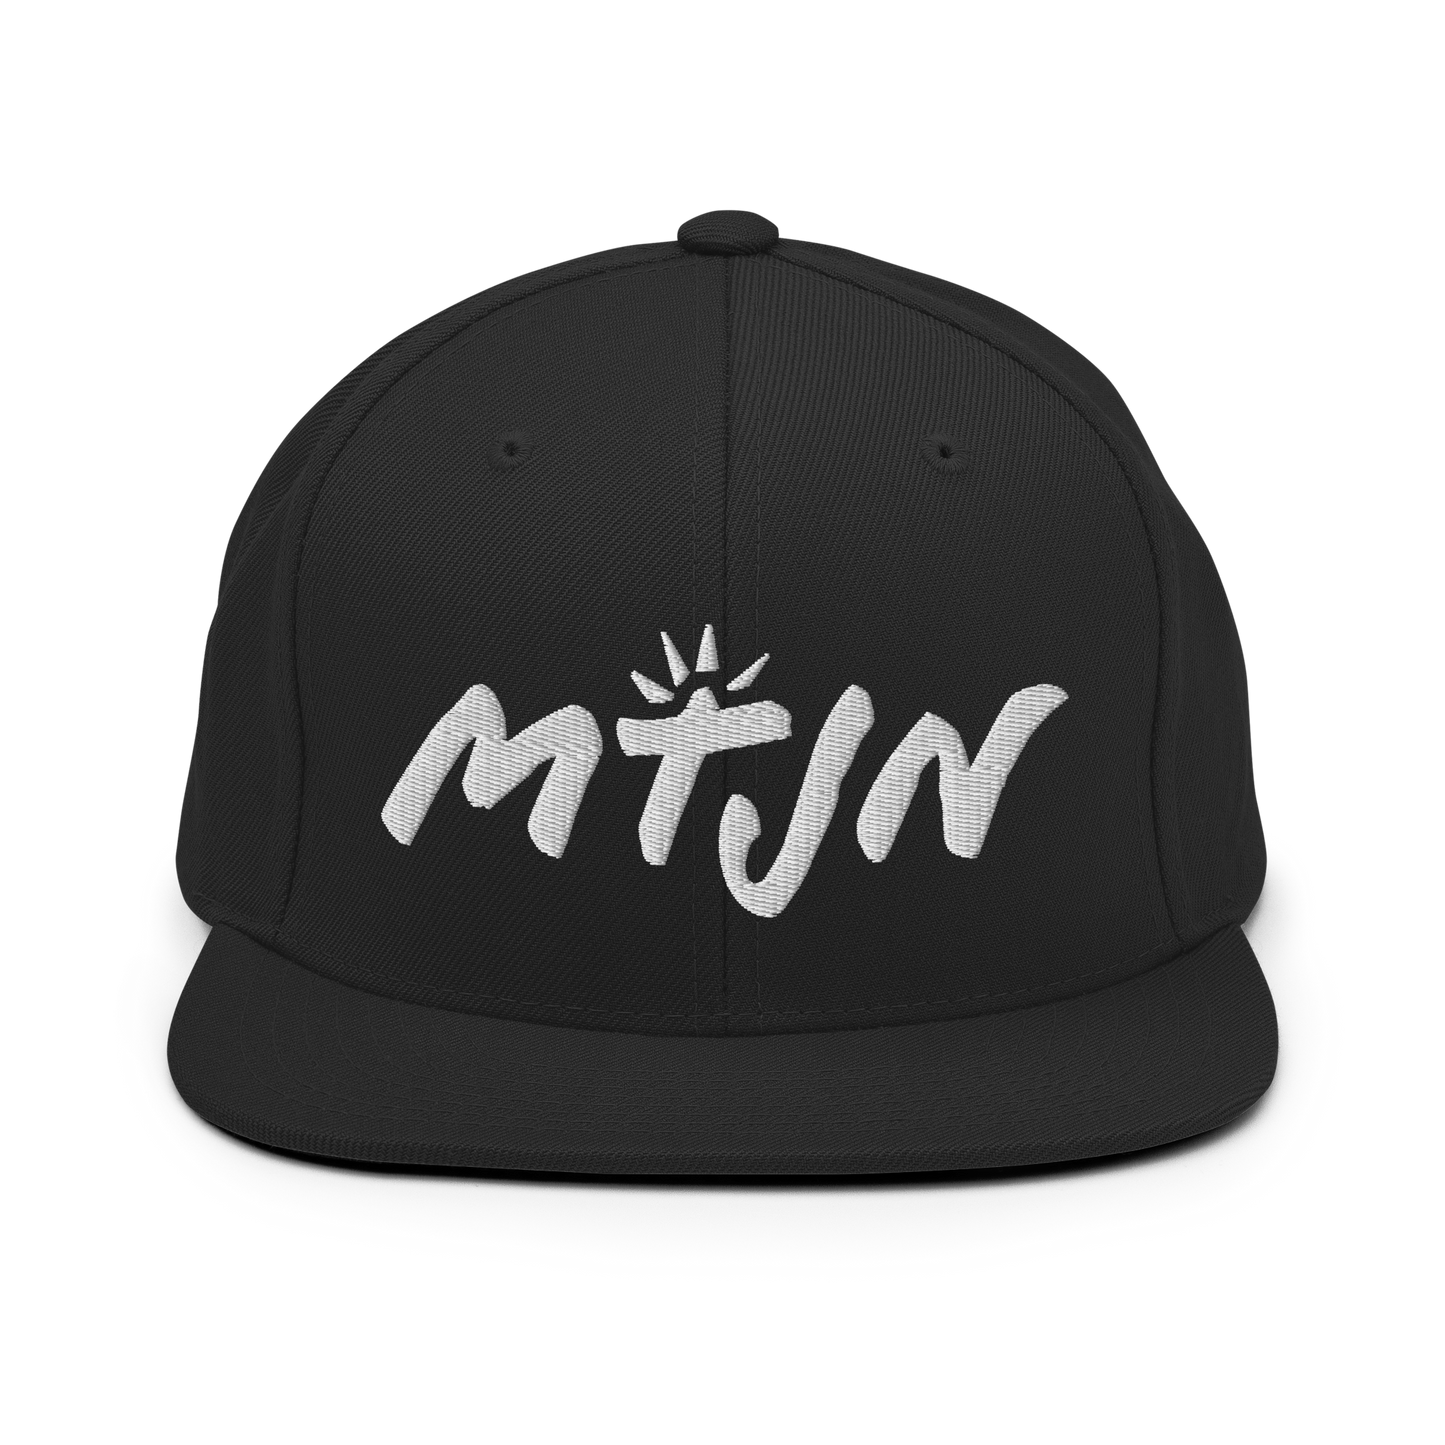 MTJN SNAPBACK - The General Booty Official Shop by More Than Just A Name | MTJN